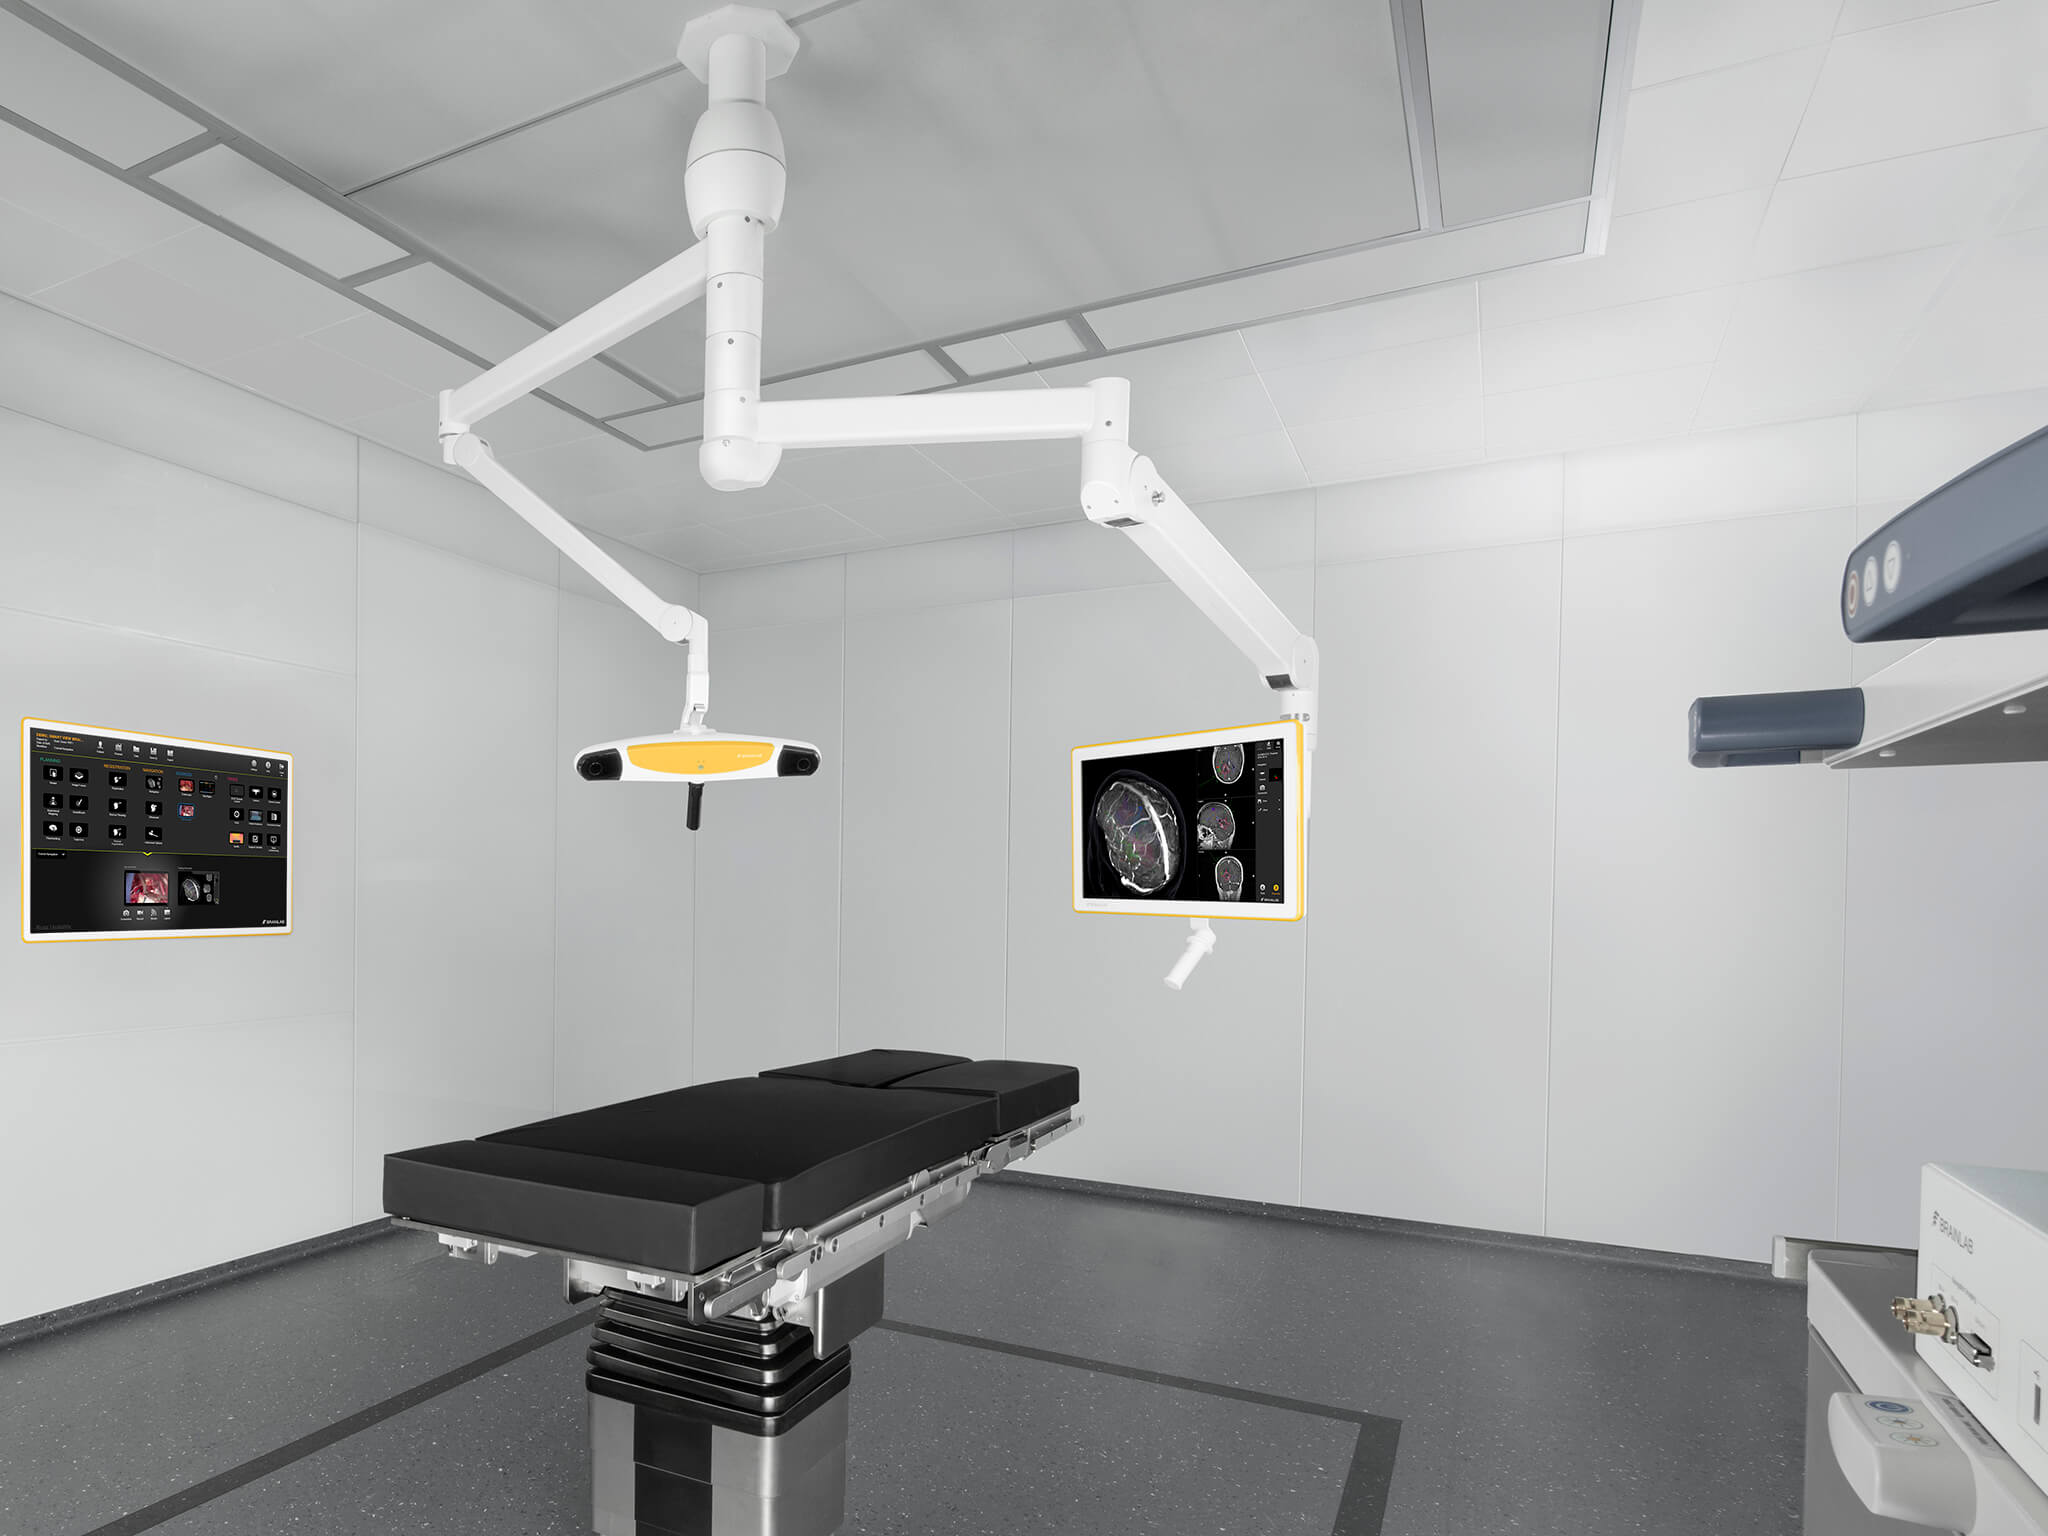 Illustration: Buzz Navigation (Ceiling-Mounted) Setup with Displays and Camera